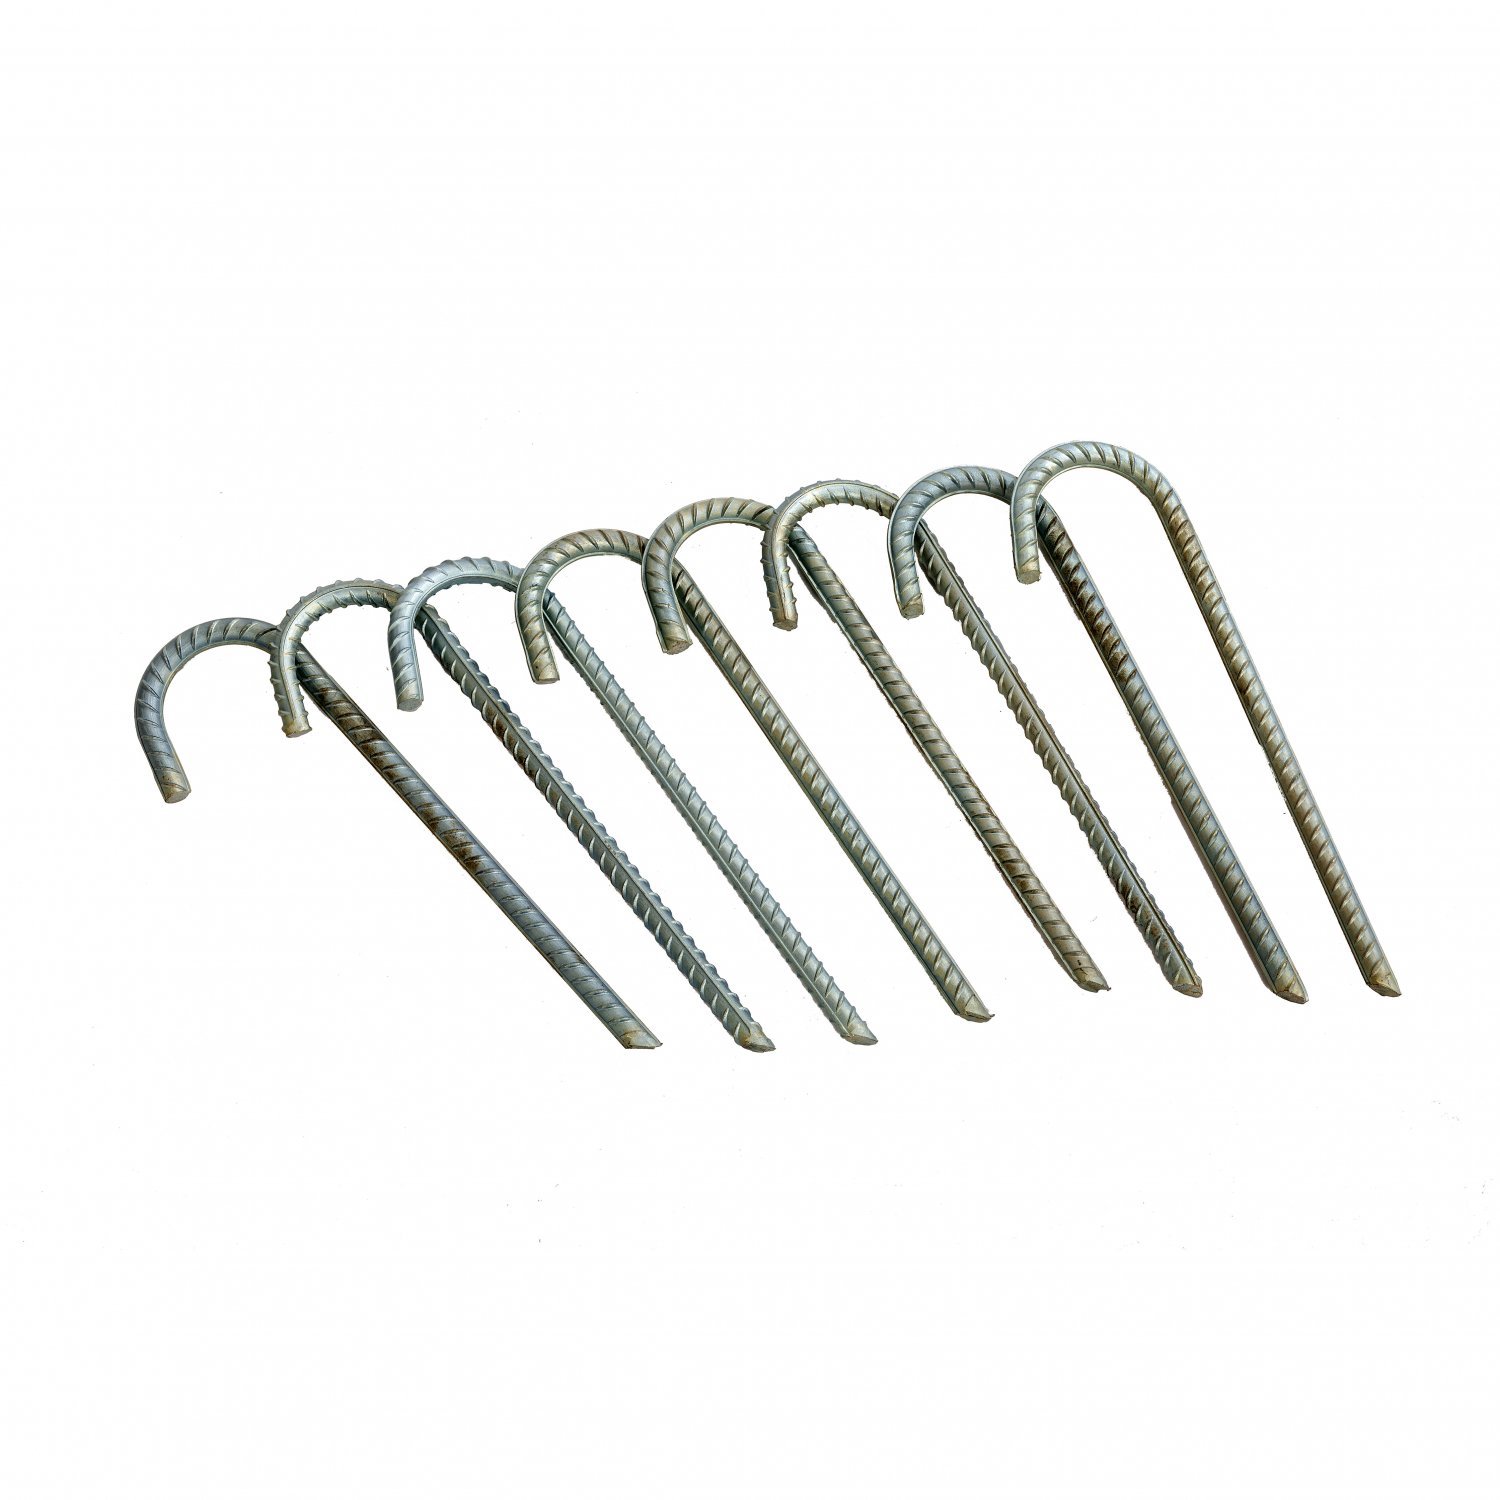 8x Galvanised Steel Ground Stakes Rebar Tent Pegs Garden Pins An